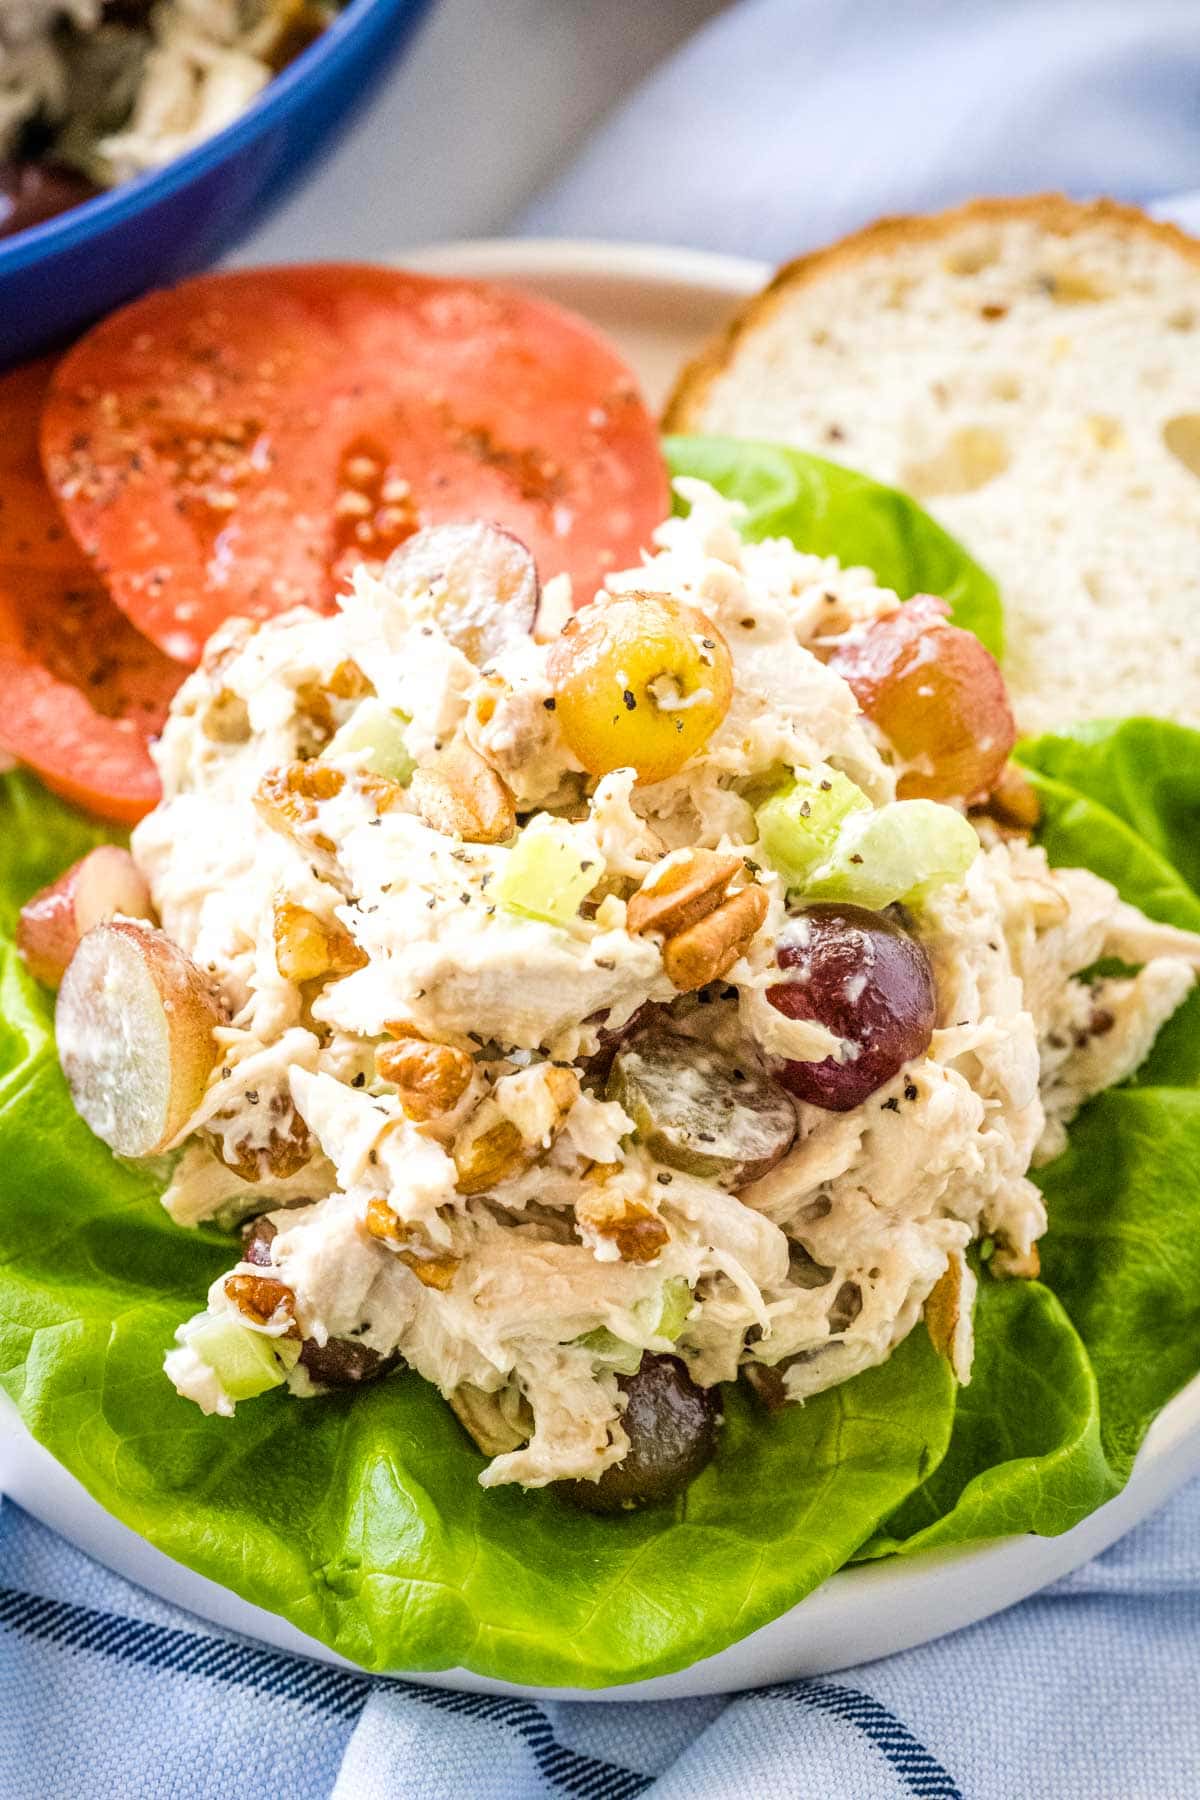 A scoop of chicken salad over a bed of lettuce served on a plate with sliced tomatoes and a slice of grain bread.